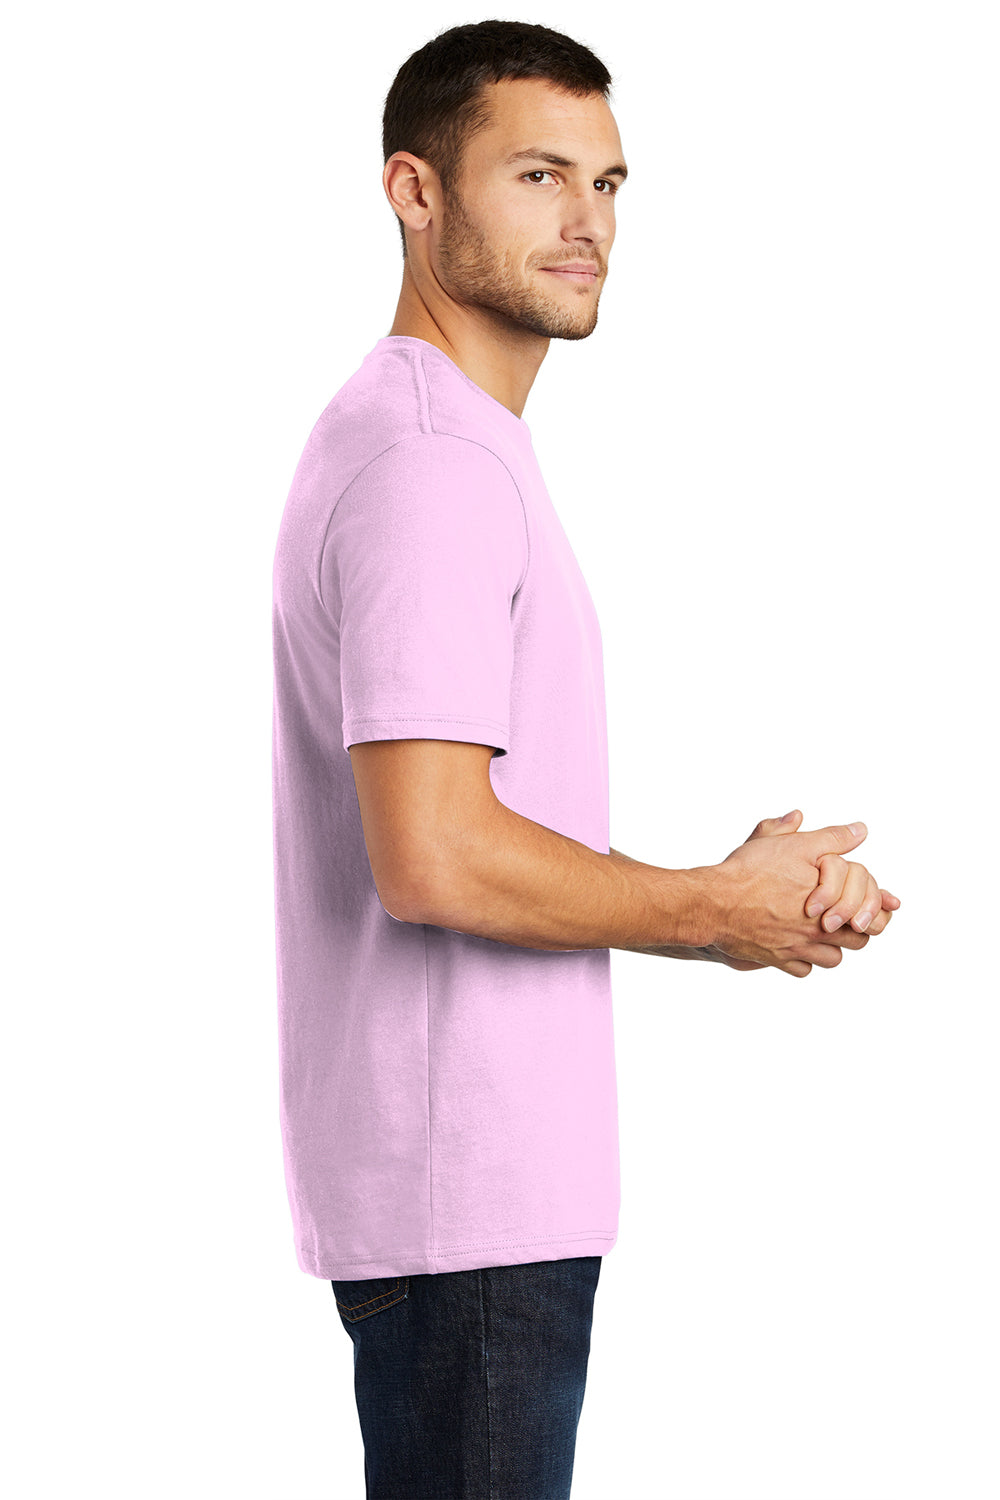 District DT104 Mens Perfect Weight Short Sleeve Crewneck T-Shirt Soft Purple Side